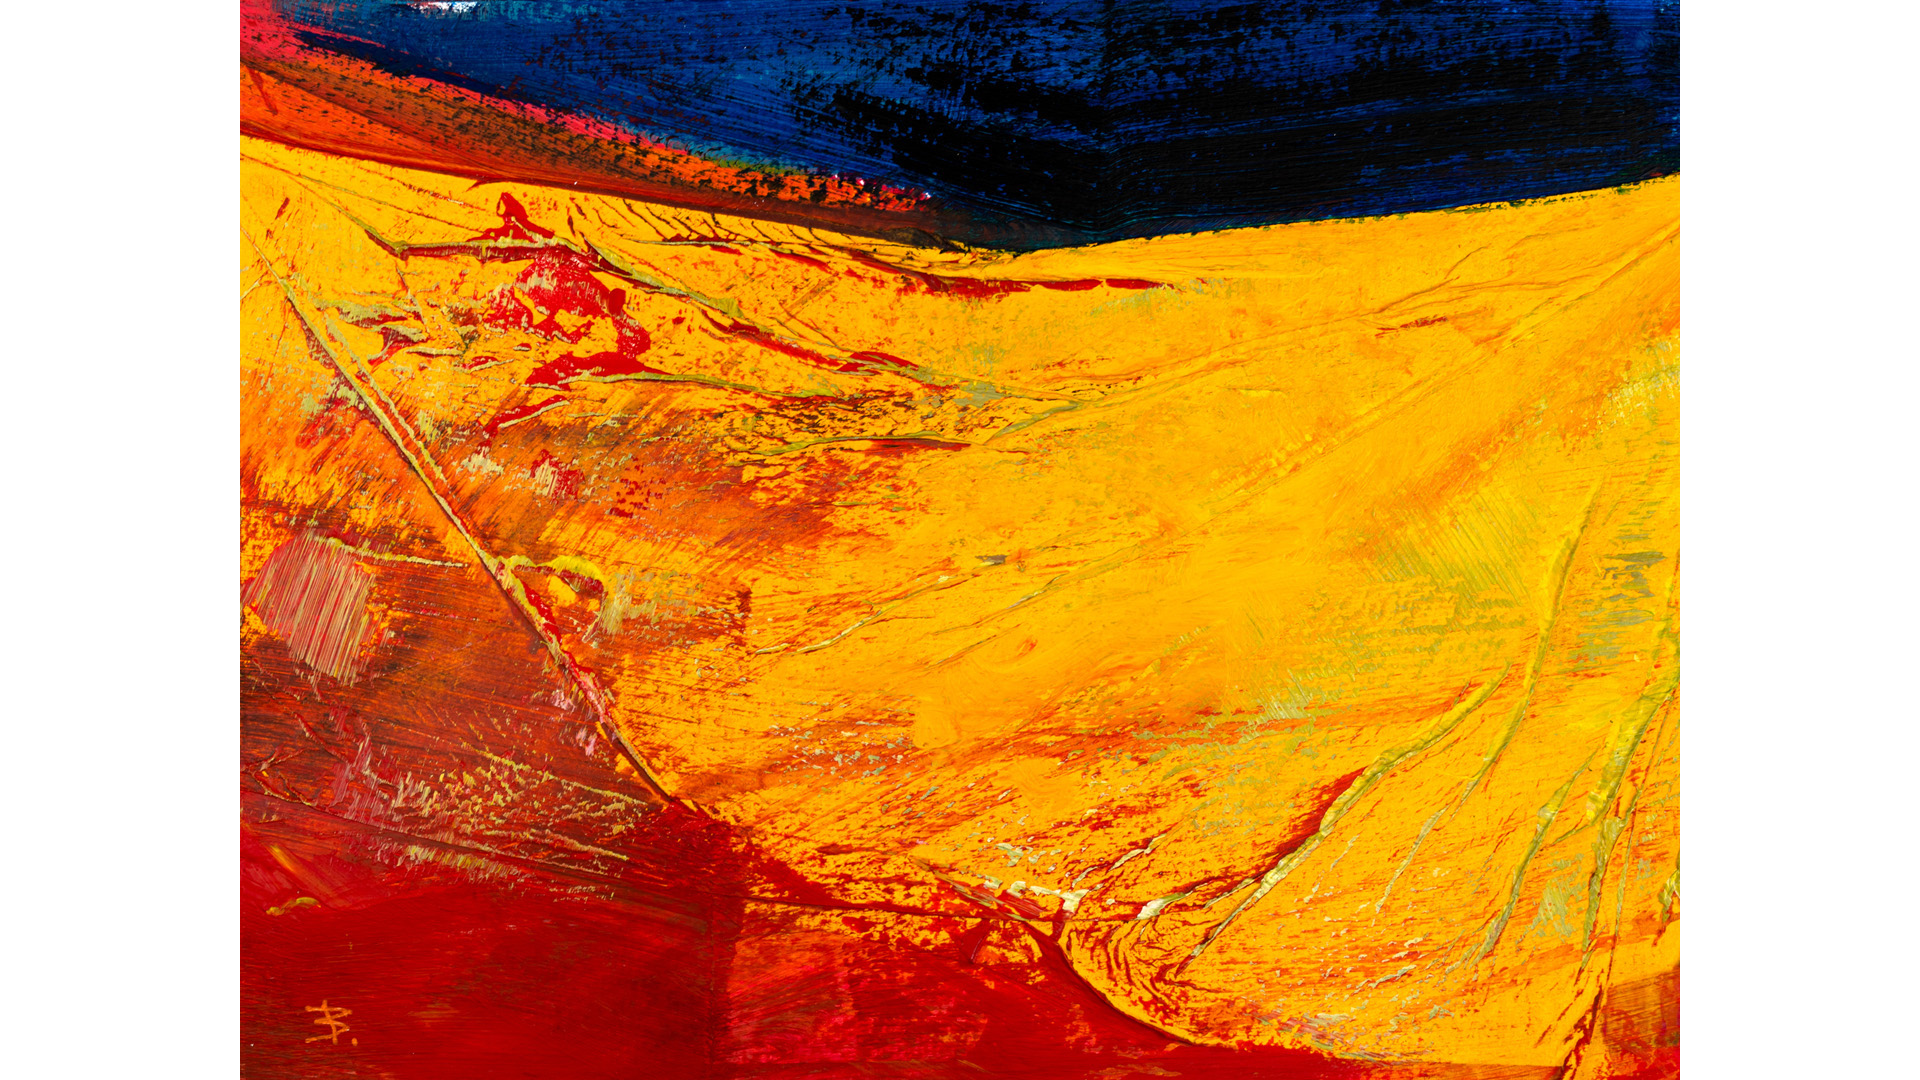 Red_Yellow_and_Blue_10220_7_24x32, © Ernest Bisaev